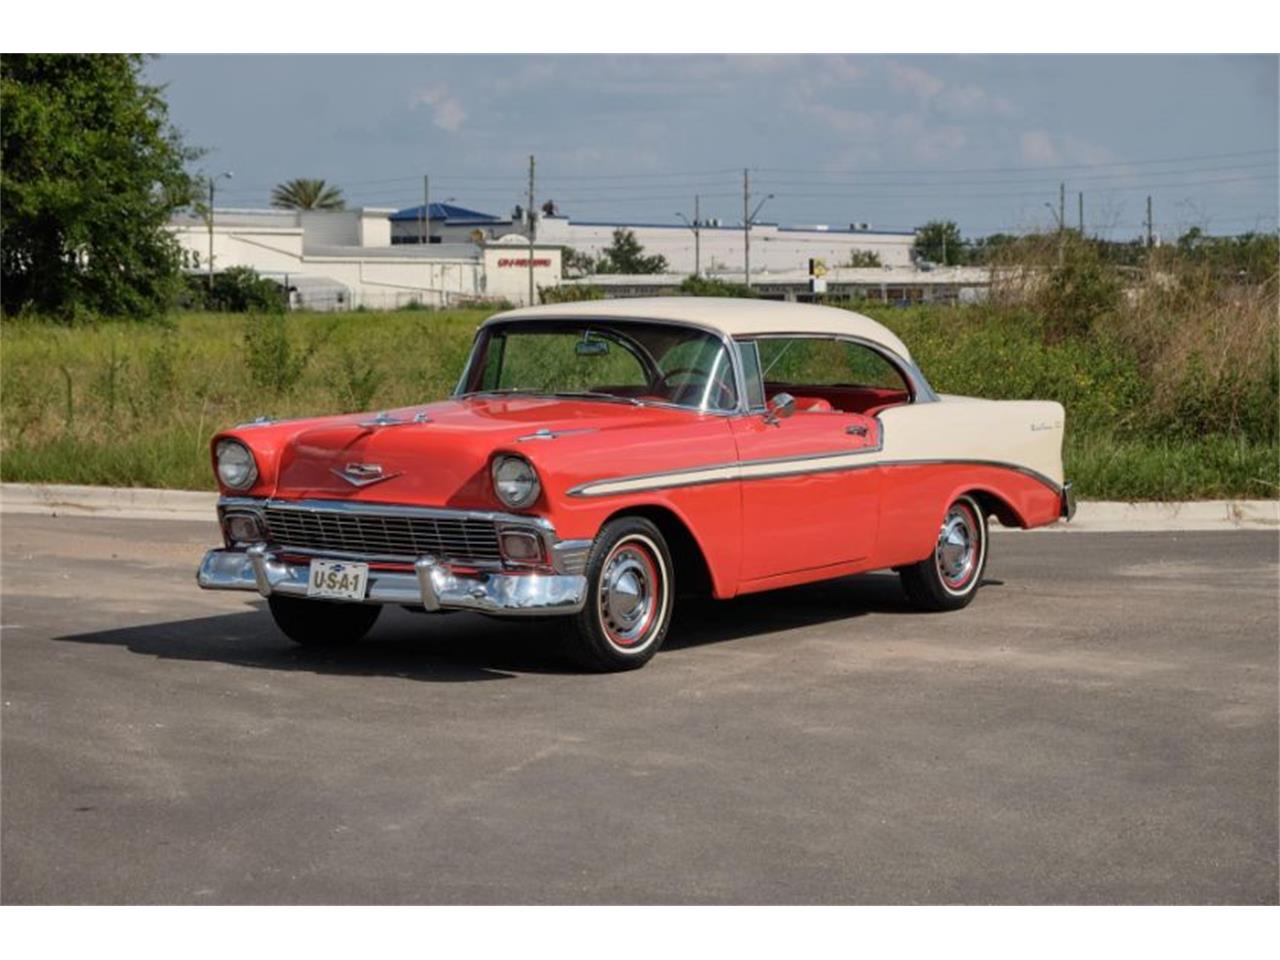 For Sale: 1956 Chevrolet Bel Air in Hobart, Indiana for sale in Hobart, IN